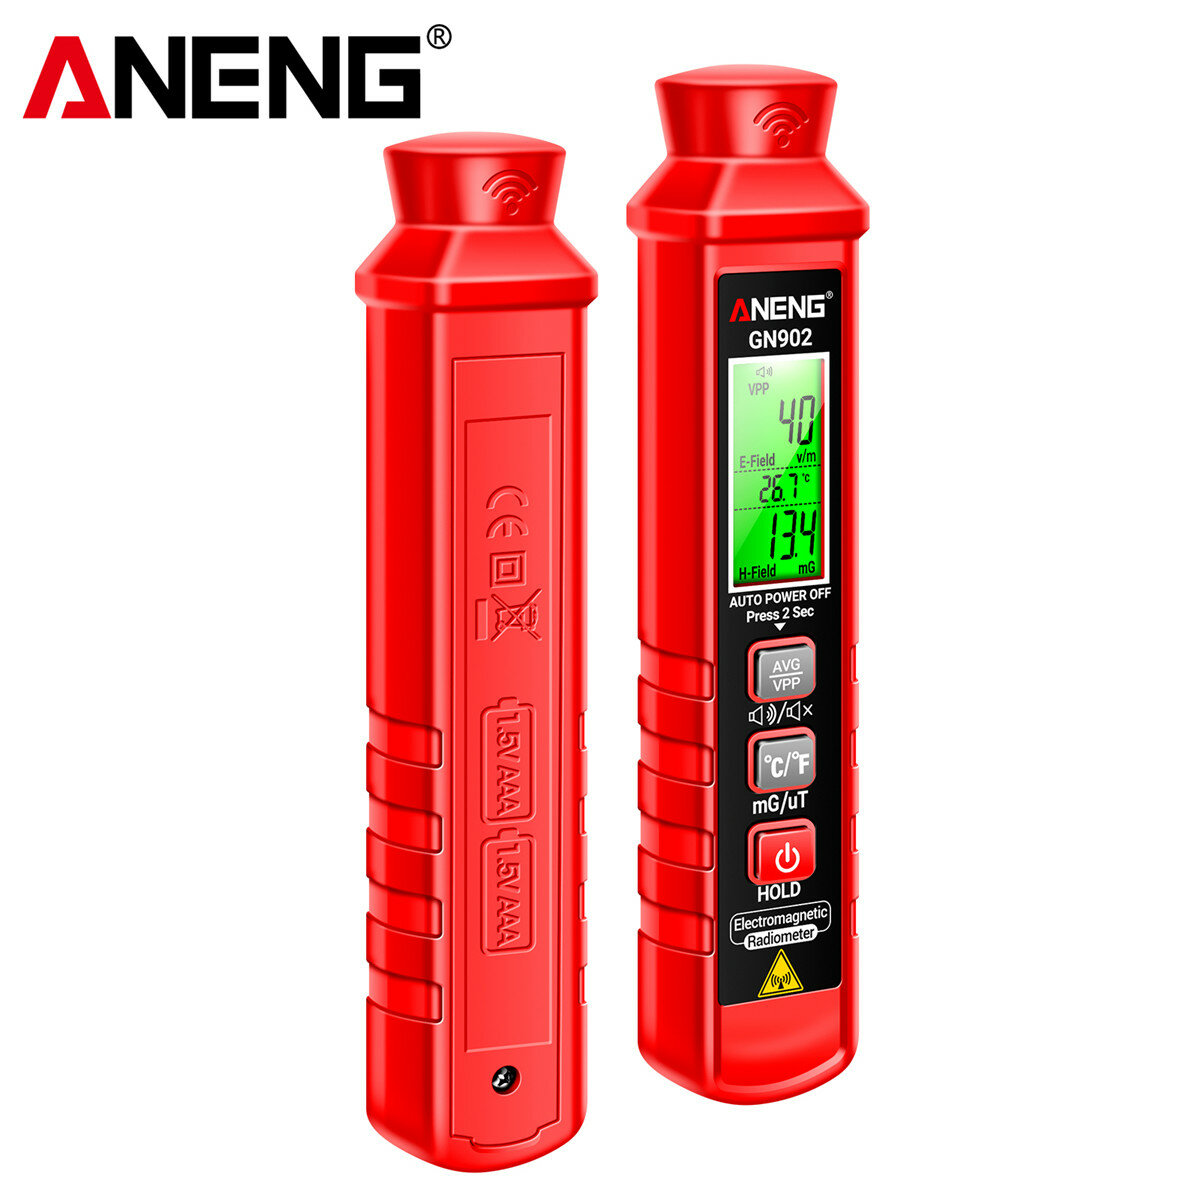 

ANENG GN902 Electromagnetic Radiation Tester 3-in-1 Electric Field Magnetic Field Temperature Detection 5Hz-3500MHz Safe